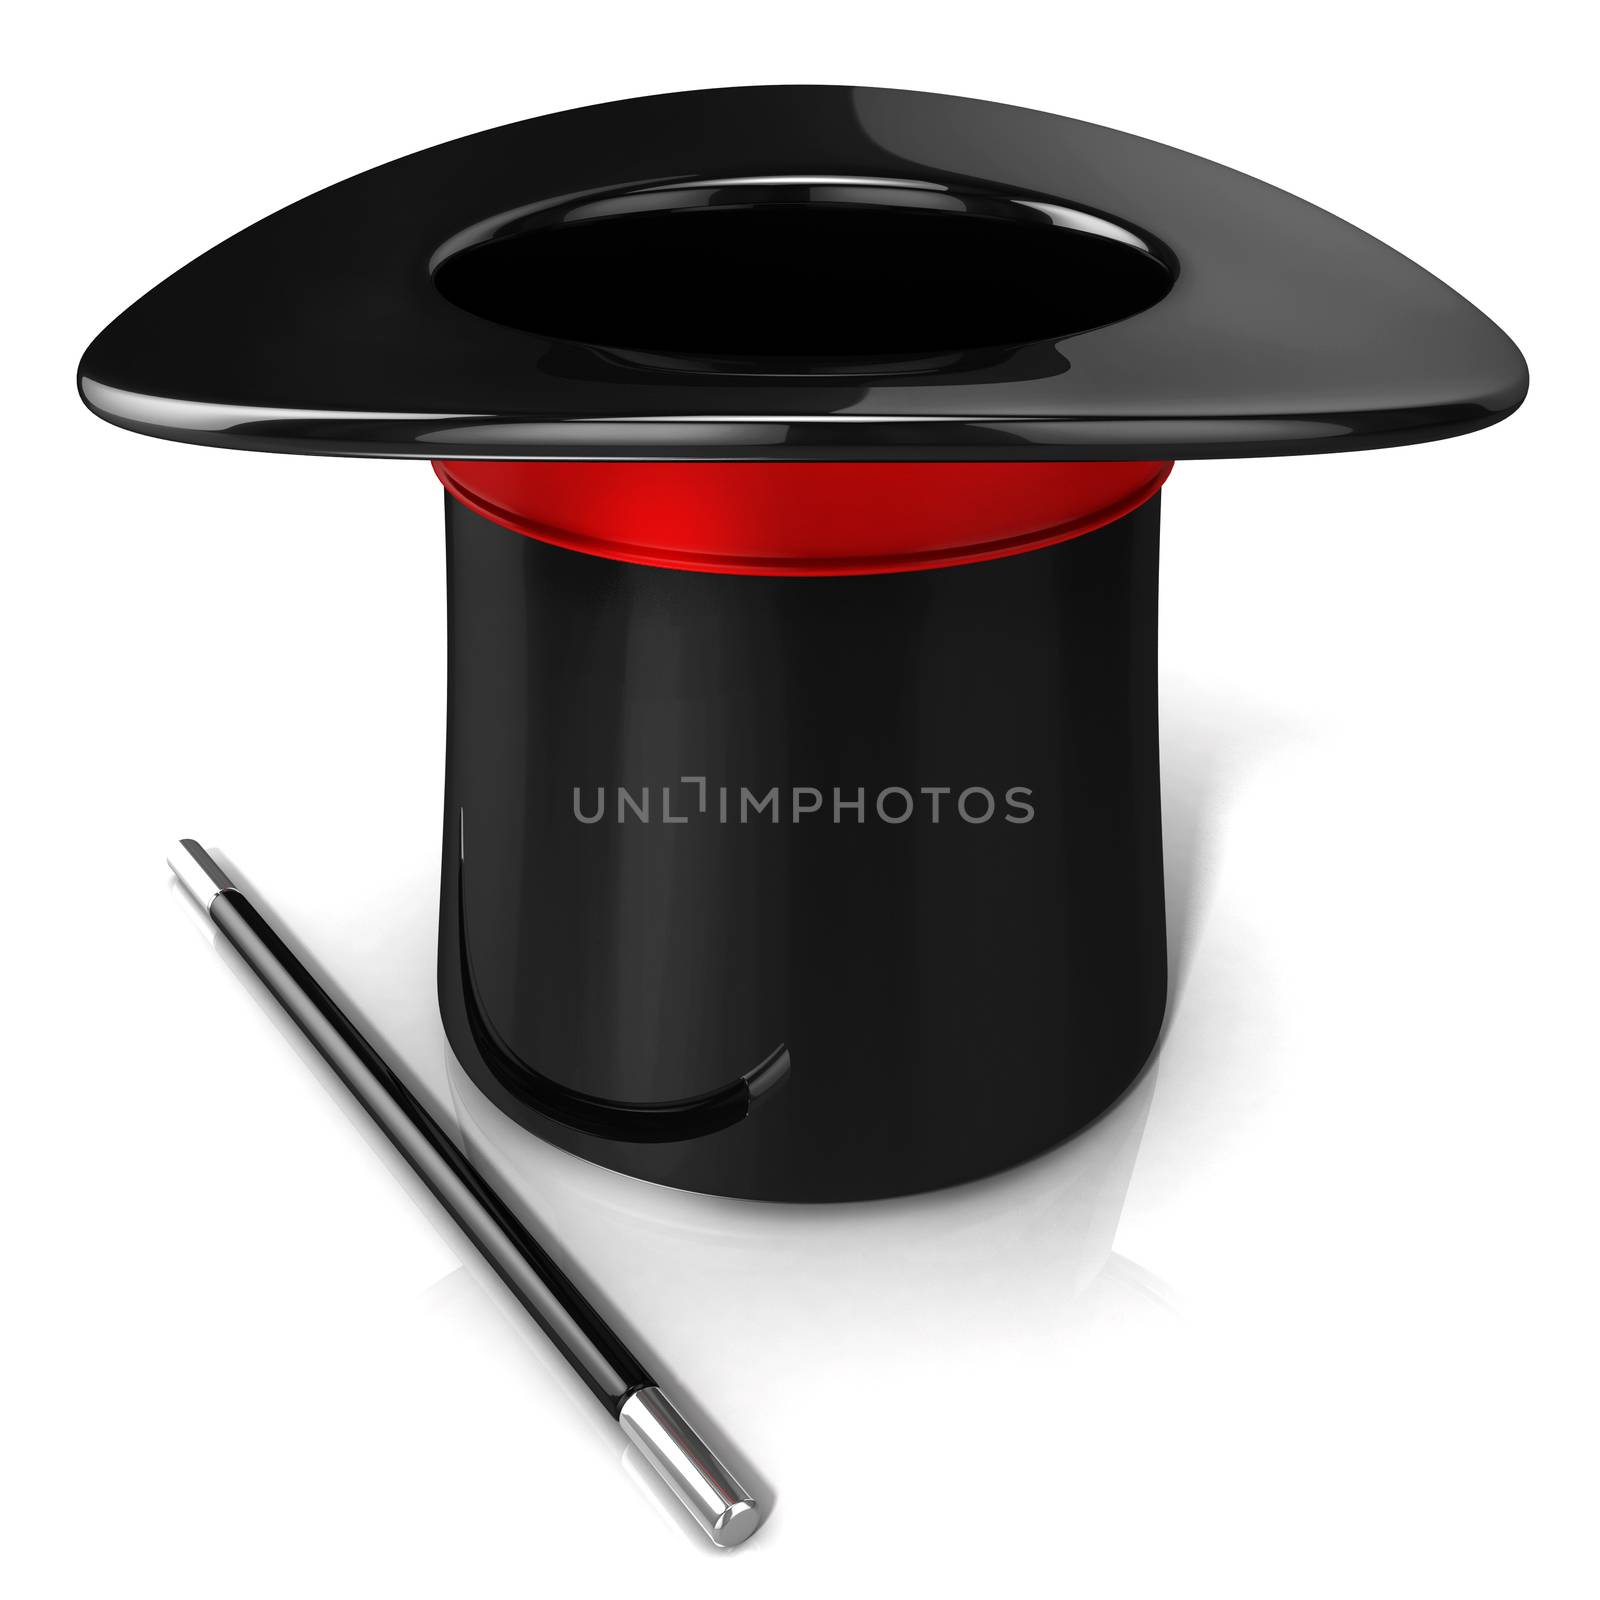 Magic hat and wand, 3D render isolated on white background. Front view